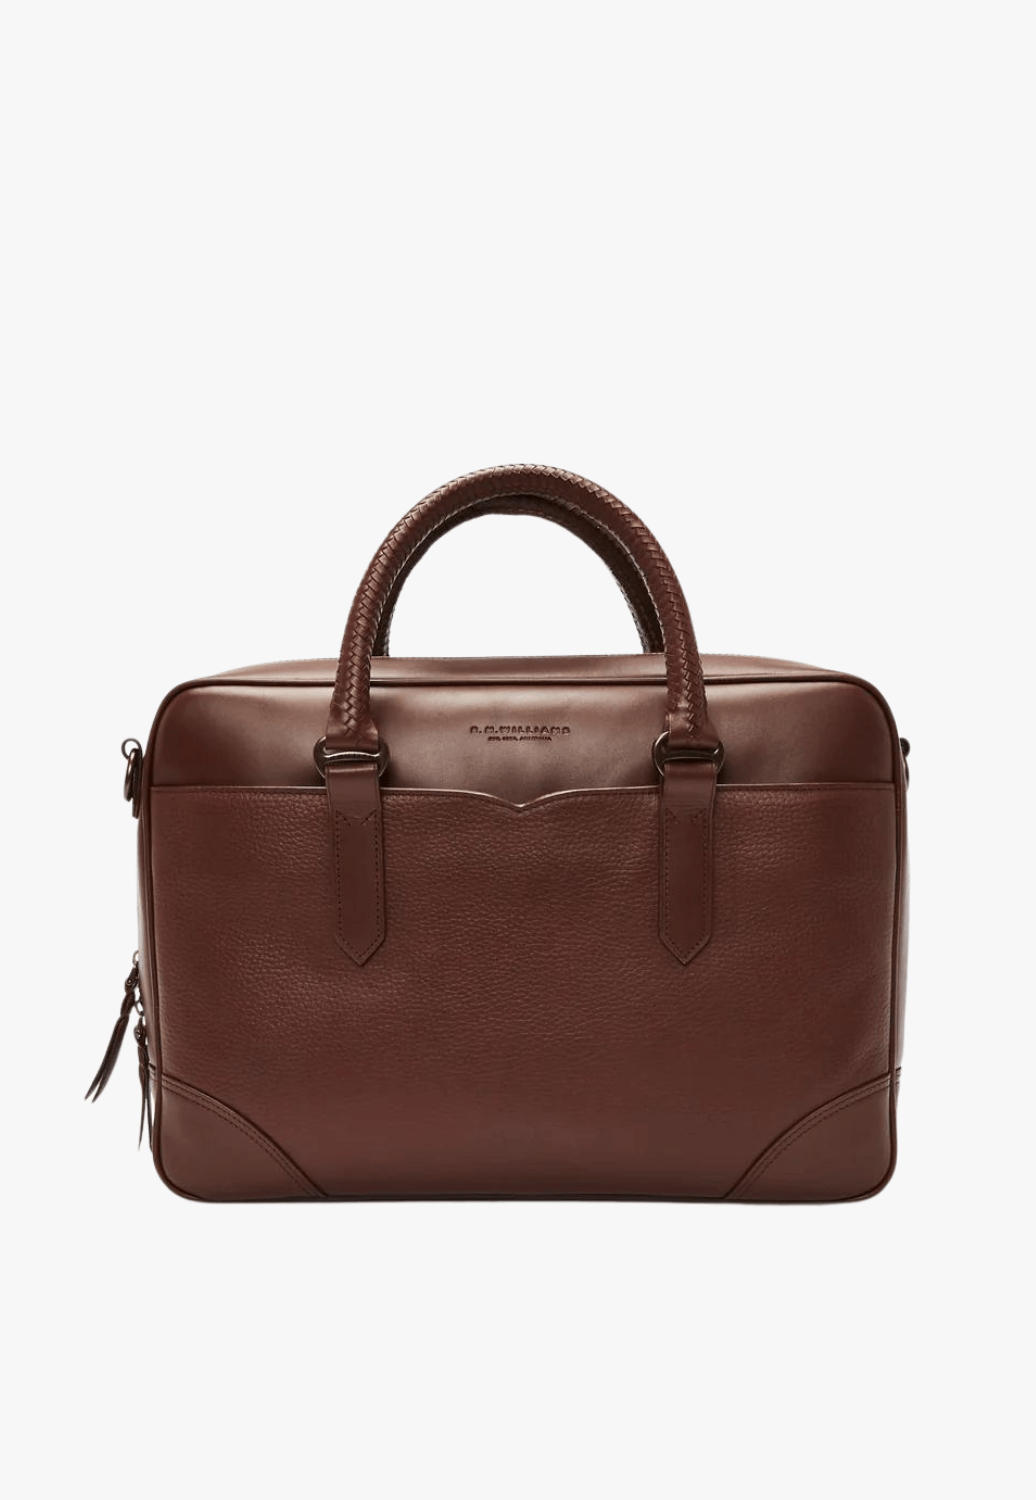 R.M. Williams TRAVEL - Briefcases Whiskey R.M. Williams Briefcase